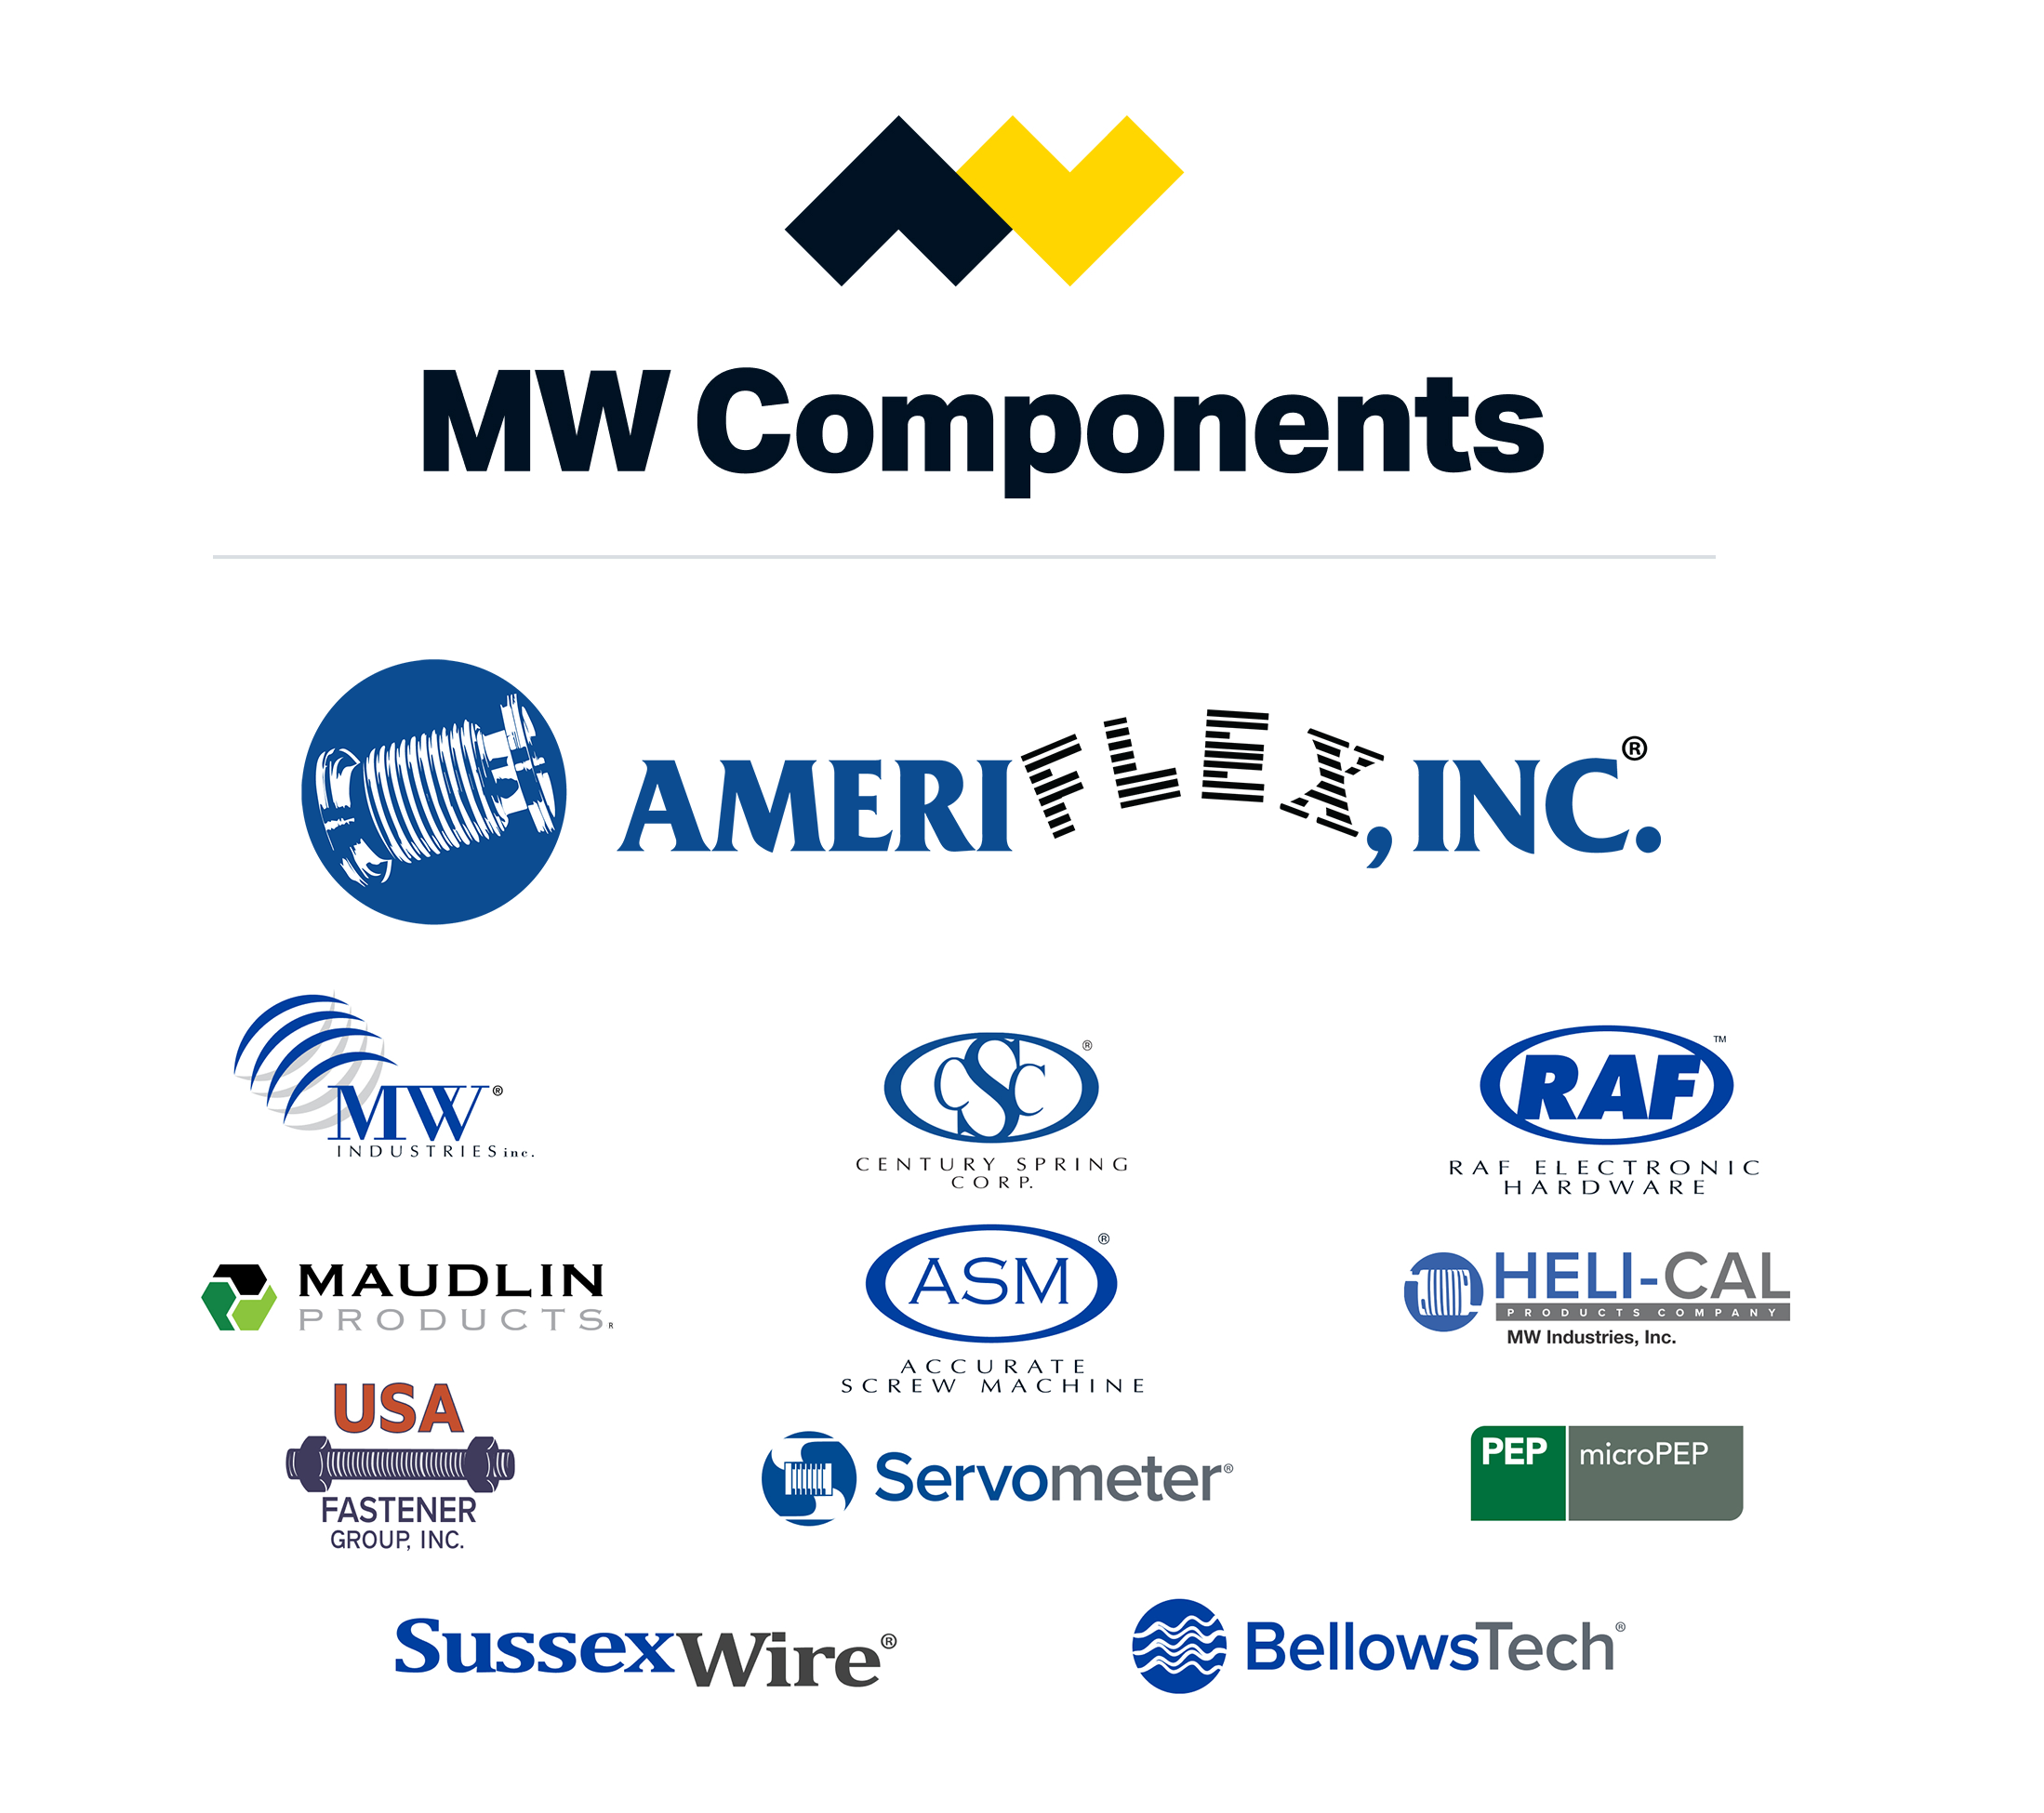 Ameriflex is now part of MW Components!